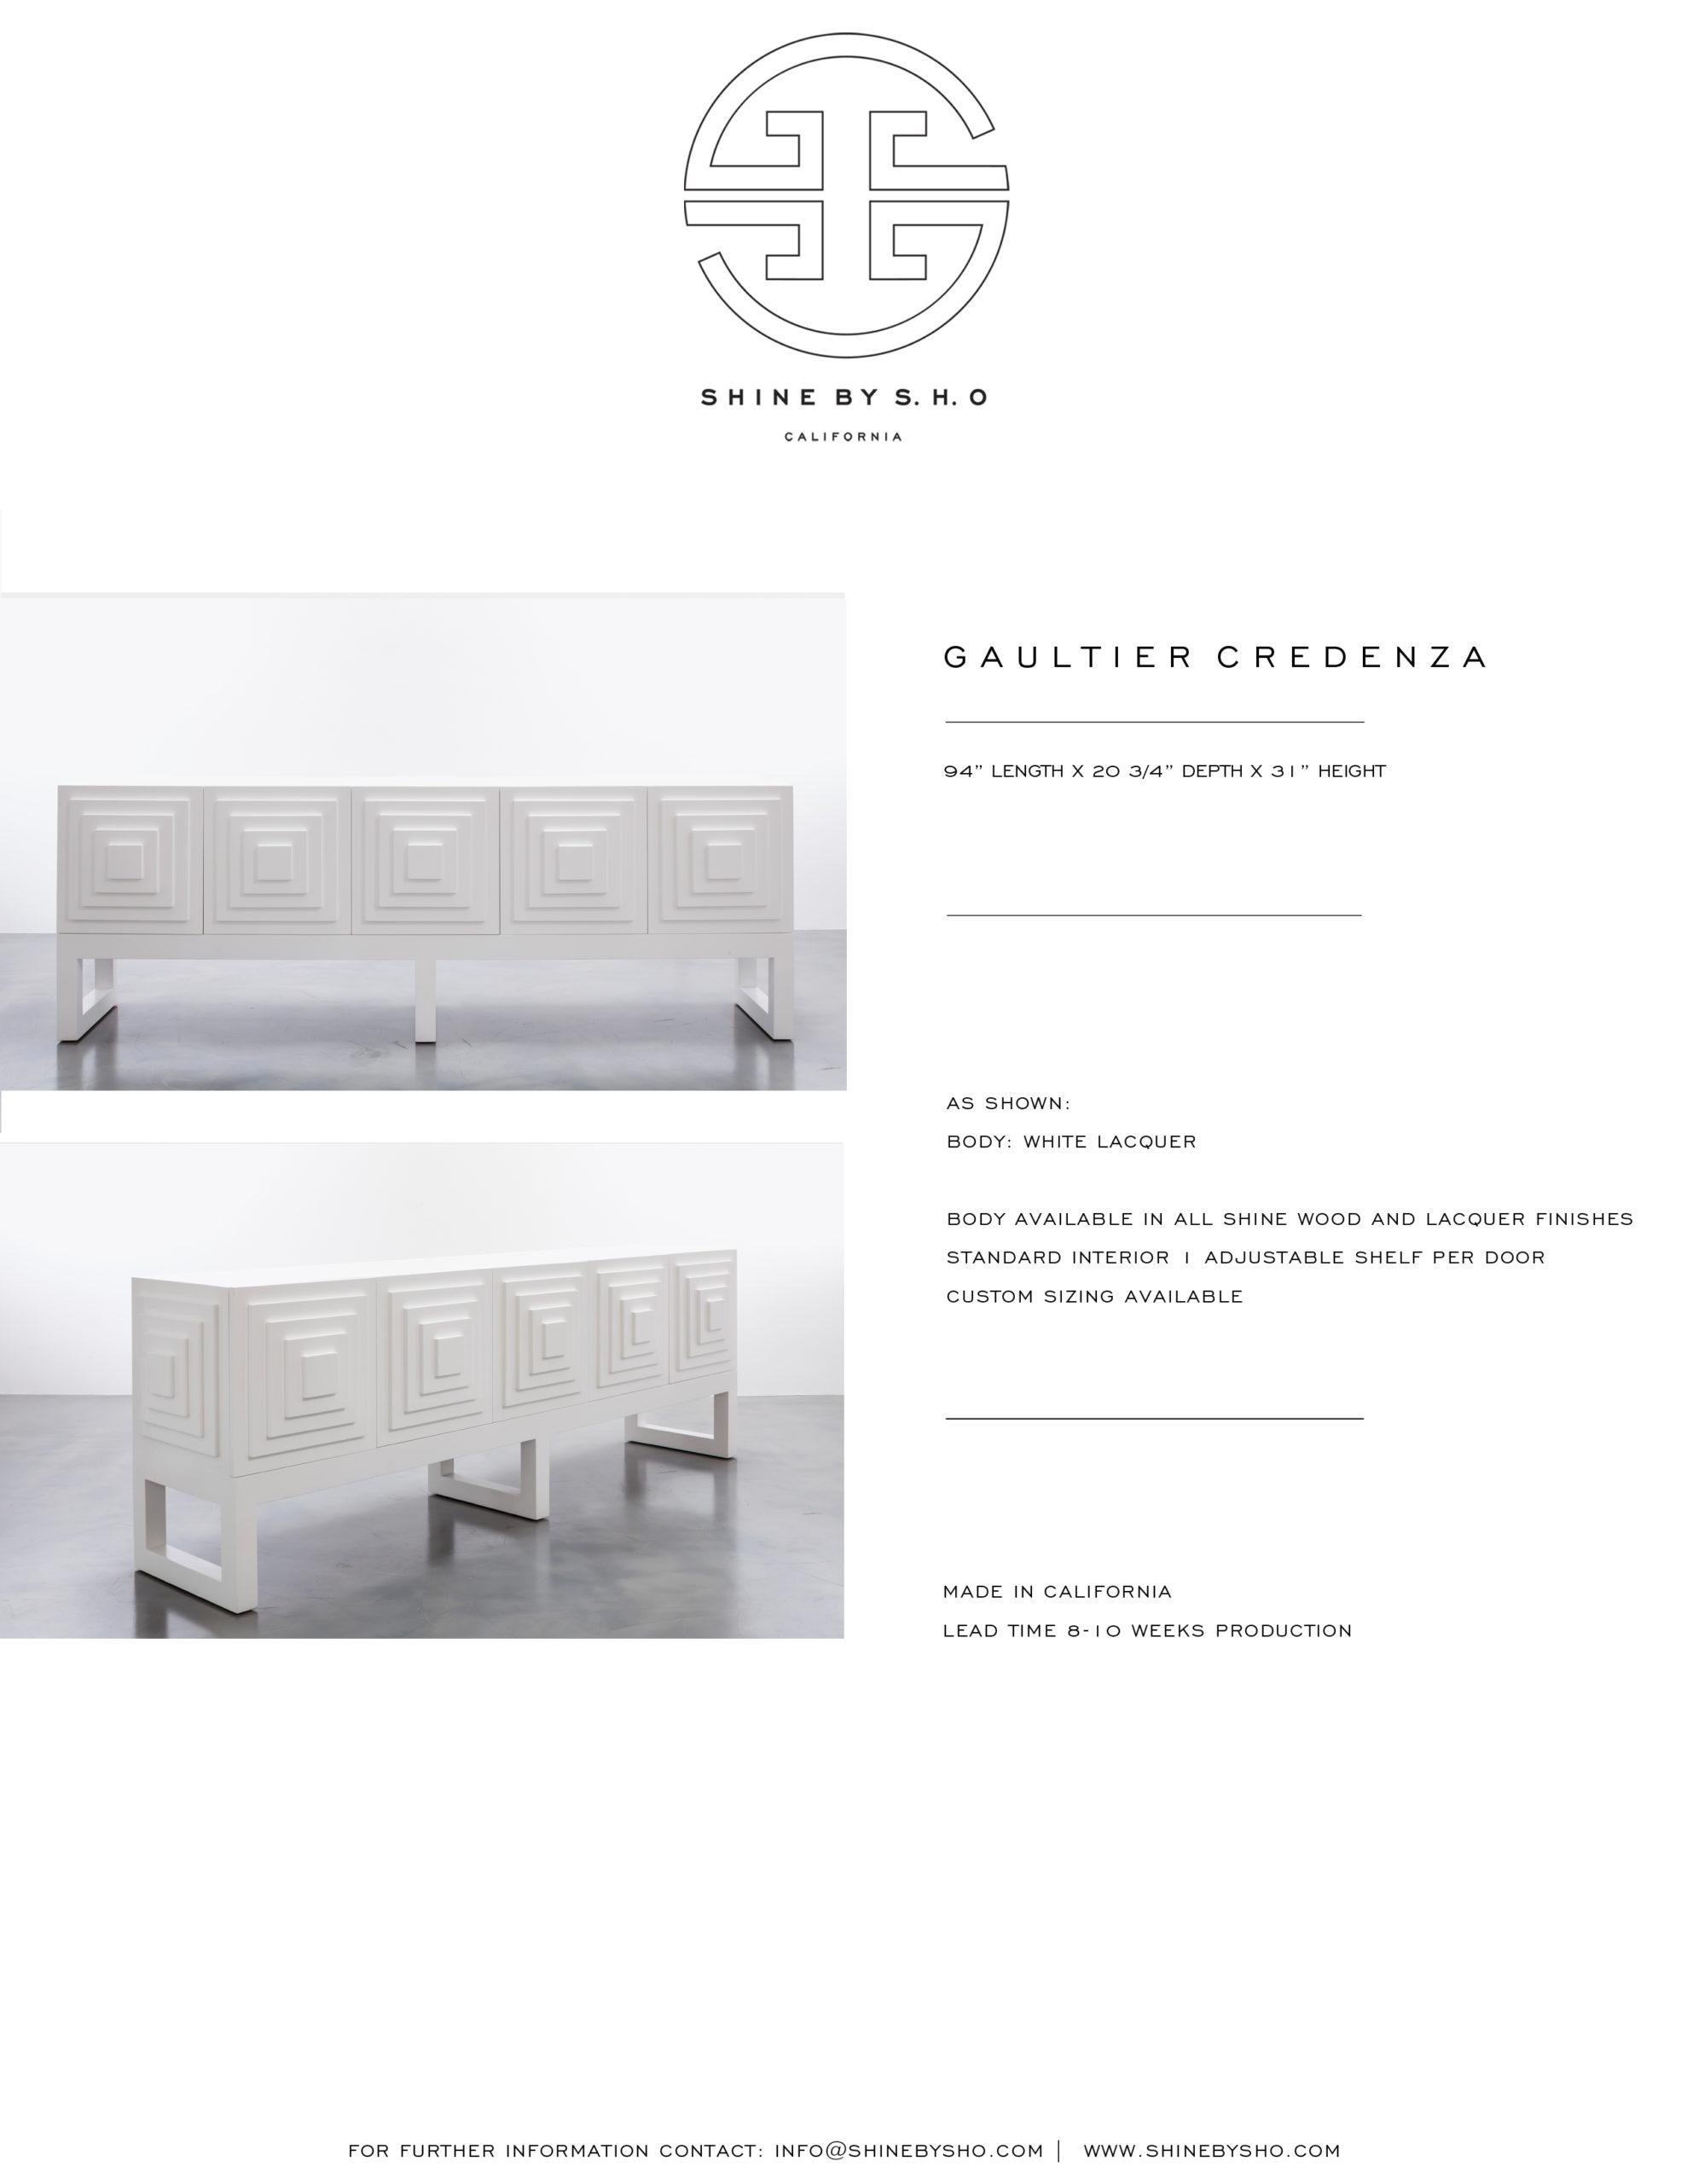 GAULTIER CREDENZA - Geometrical Square Door Design in White Lacquer In New Condition For Sale In Laguna Niguel, CA